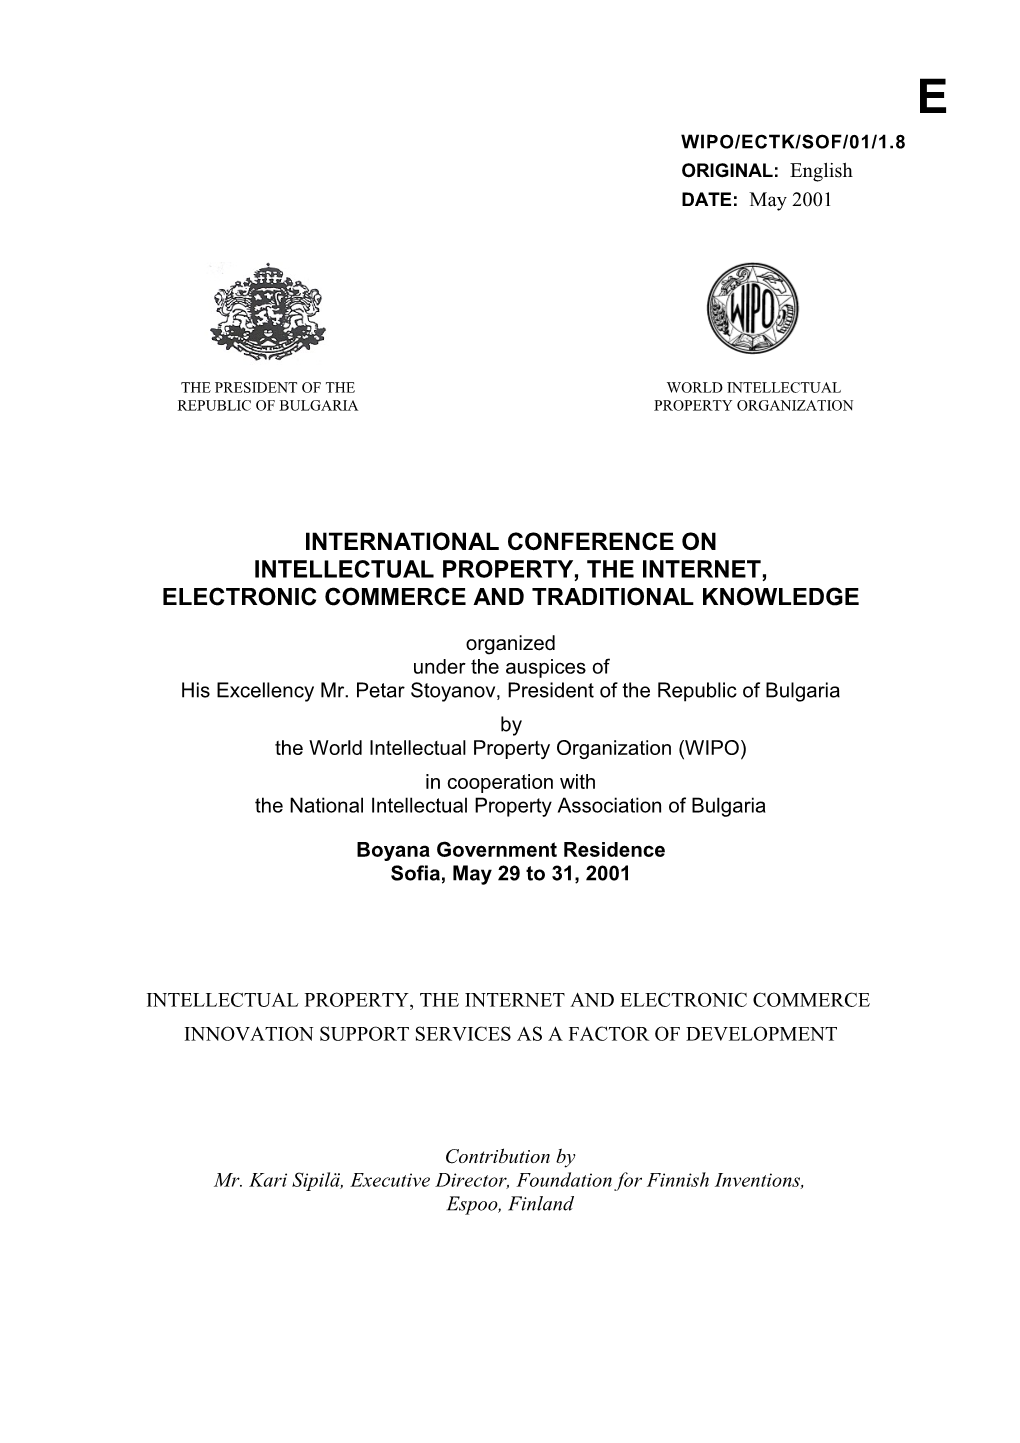 WIPO/ECTK/SOF/01/1.8: Intellectual Property, the Internet and Electronic Commerce. Innovation